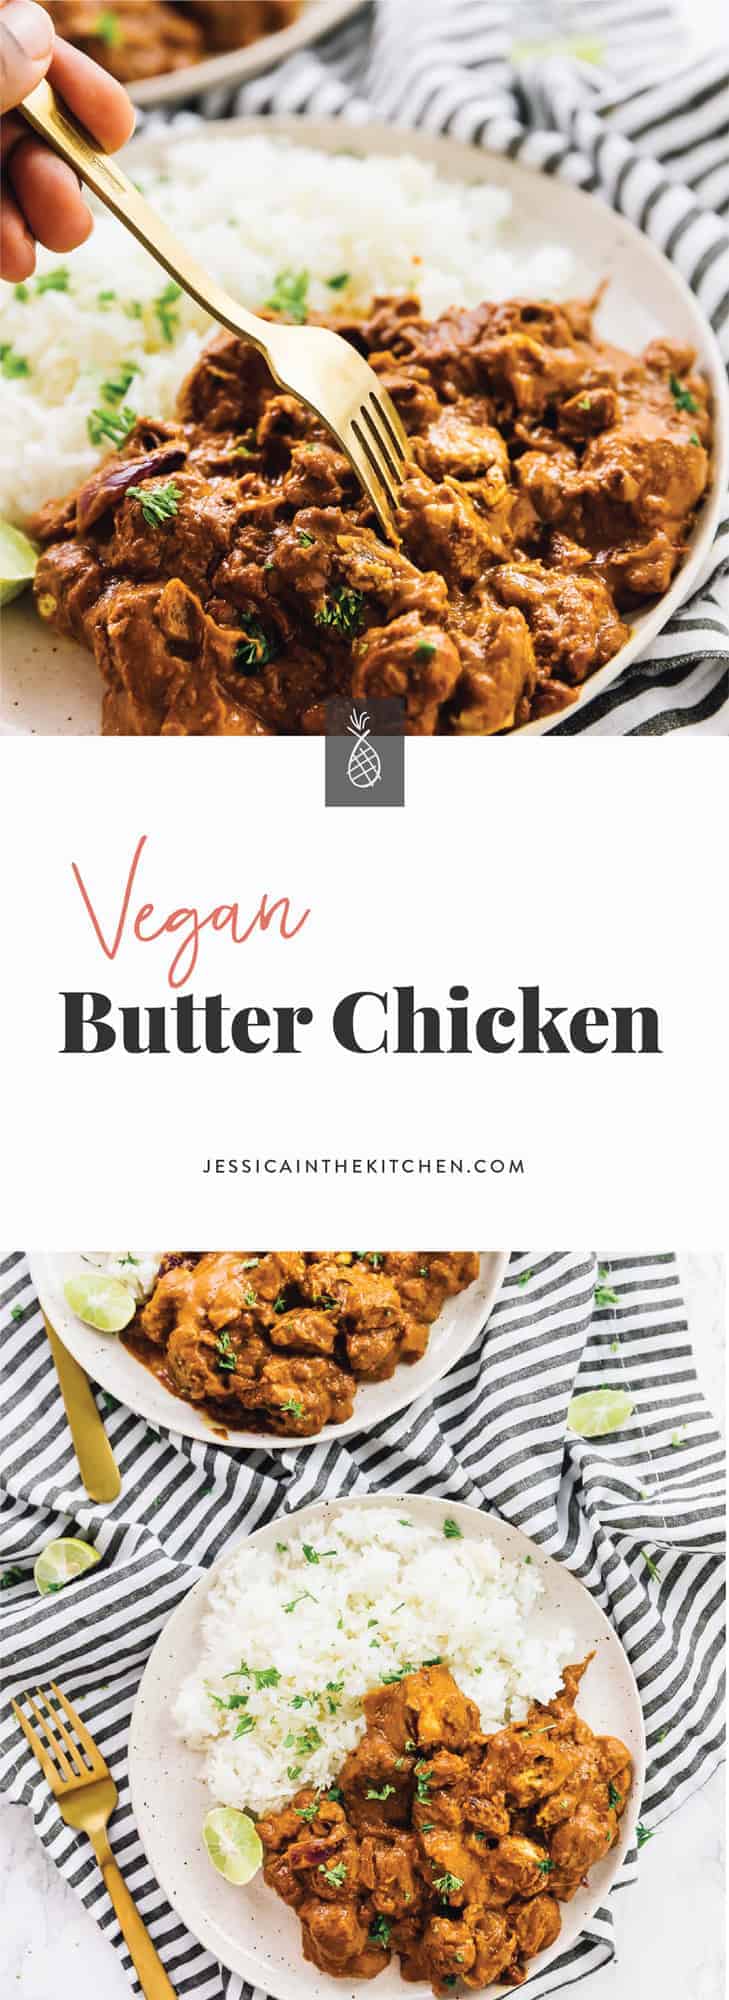 This Vegan Butter Chicken will blow your mind and impress your friends! It's a healthier version of the classic, and so rich and creamy! via https://jessicainthekitchen.com